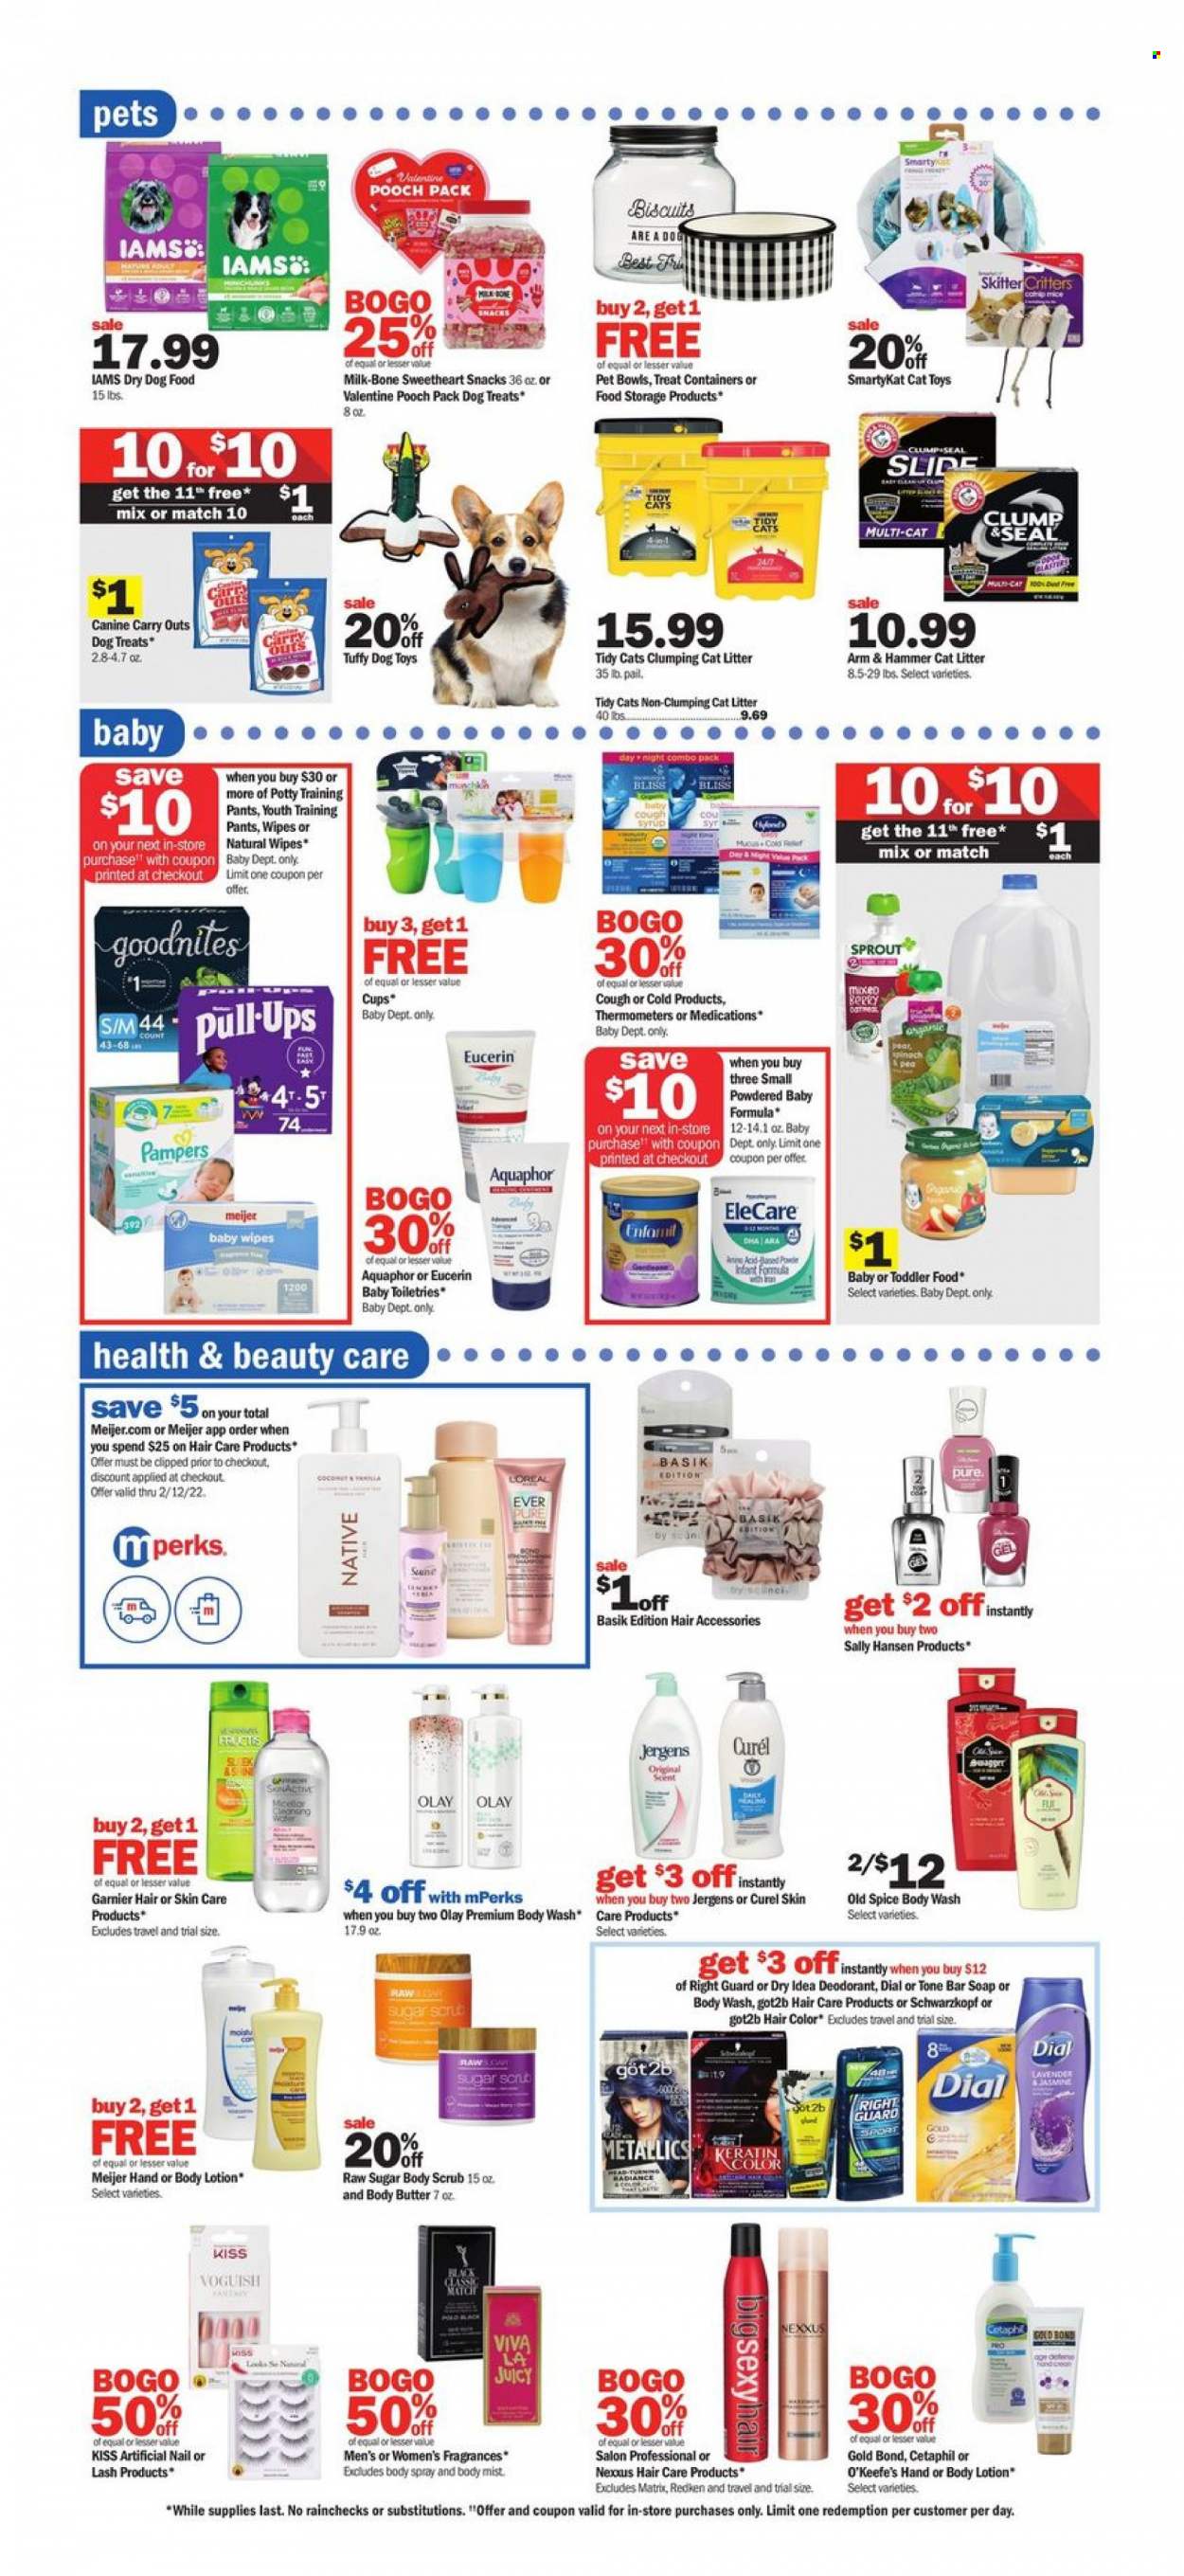 thumbnail - Meijer Flyer - 01/16/2022 - 01/22/2022 - Sales products - pears, milk, snack, biscuit, ARM & HAMMER, spice, syrup, wipes, Pampers, pants, baby wipes, baby pants, Aquaphor, body wash, Old Spice, Schwarzkopf, soap bar, Dial, Raw Sugar, soap, Garnier, Olay, Curél, hair color, Nexxus, keratin, body butter, body lotion, body mist, body scrub, body spray, Eucerin, Jergens, anti-perspirant, deodorant, Sally Hansen, cup, cat litter, mouse, cat toy, dog toy, Tuffy, animal food, dog food, dry dog food, Iams. Page 15.